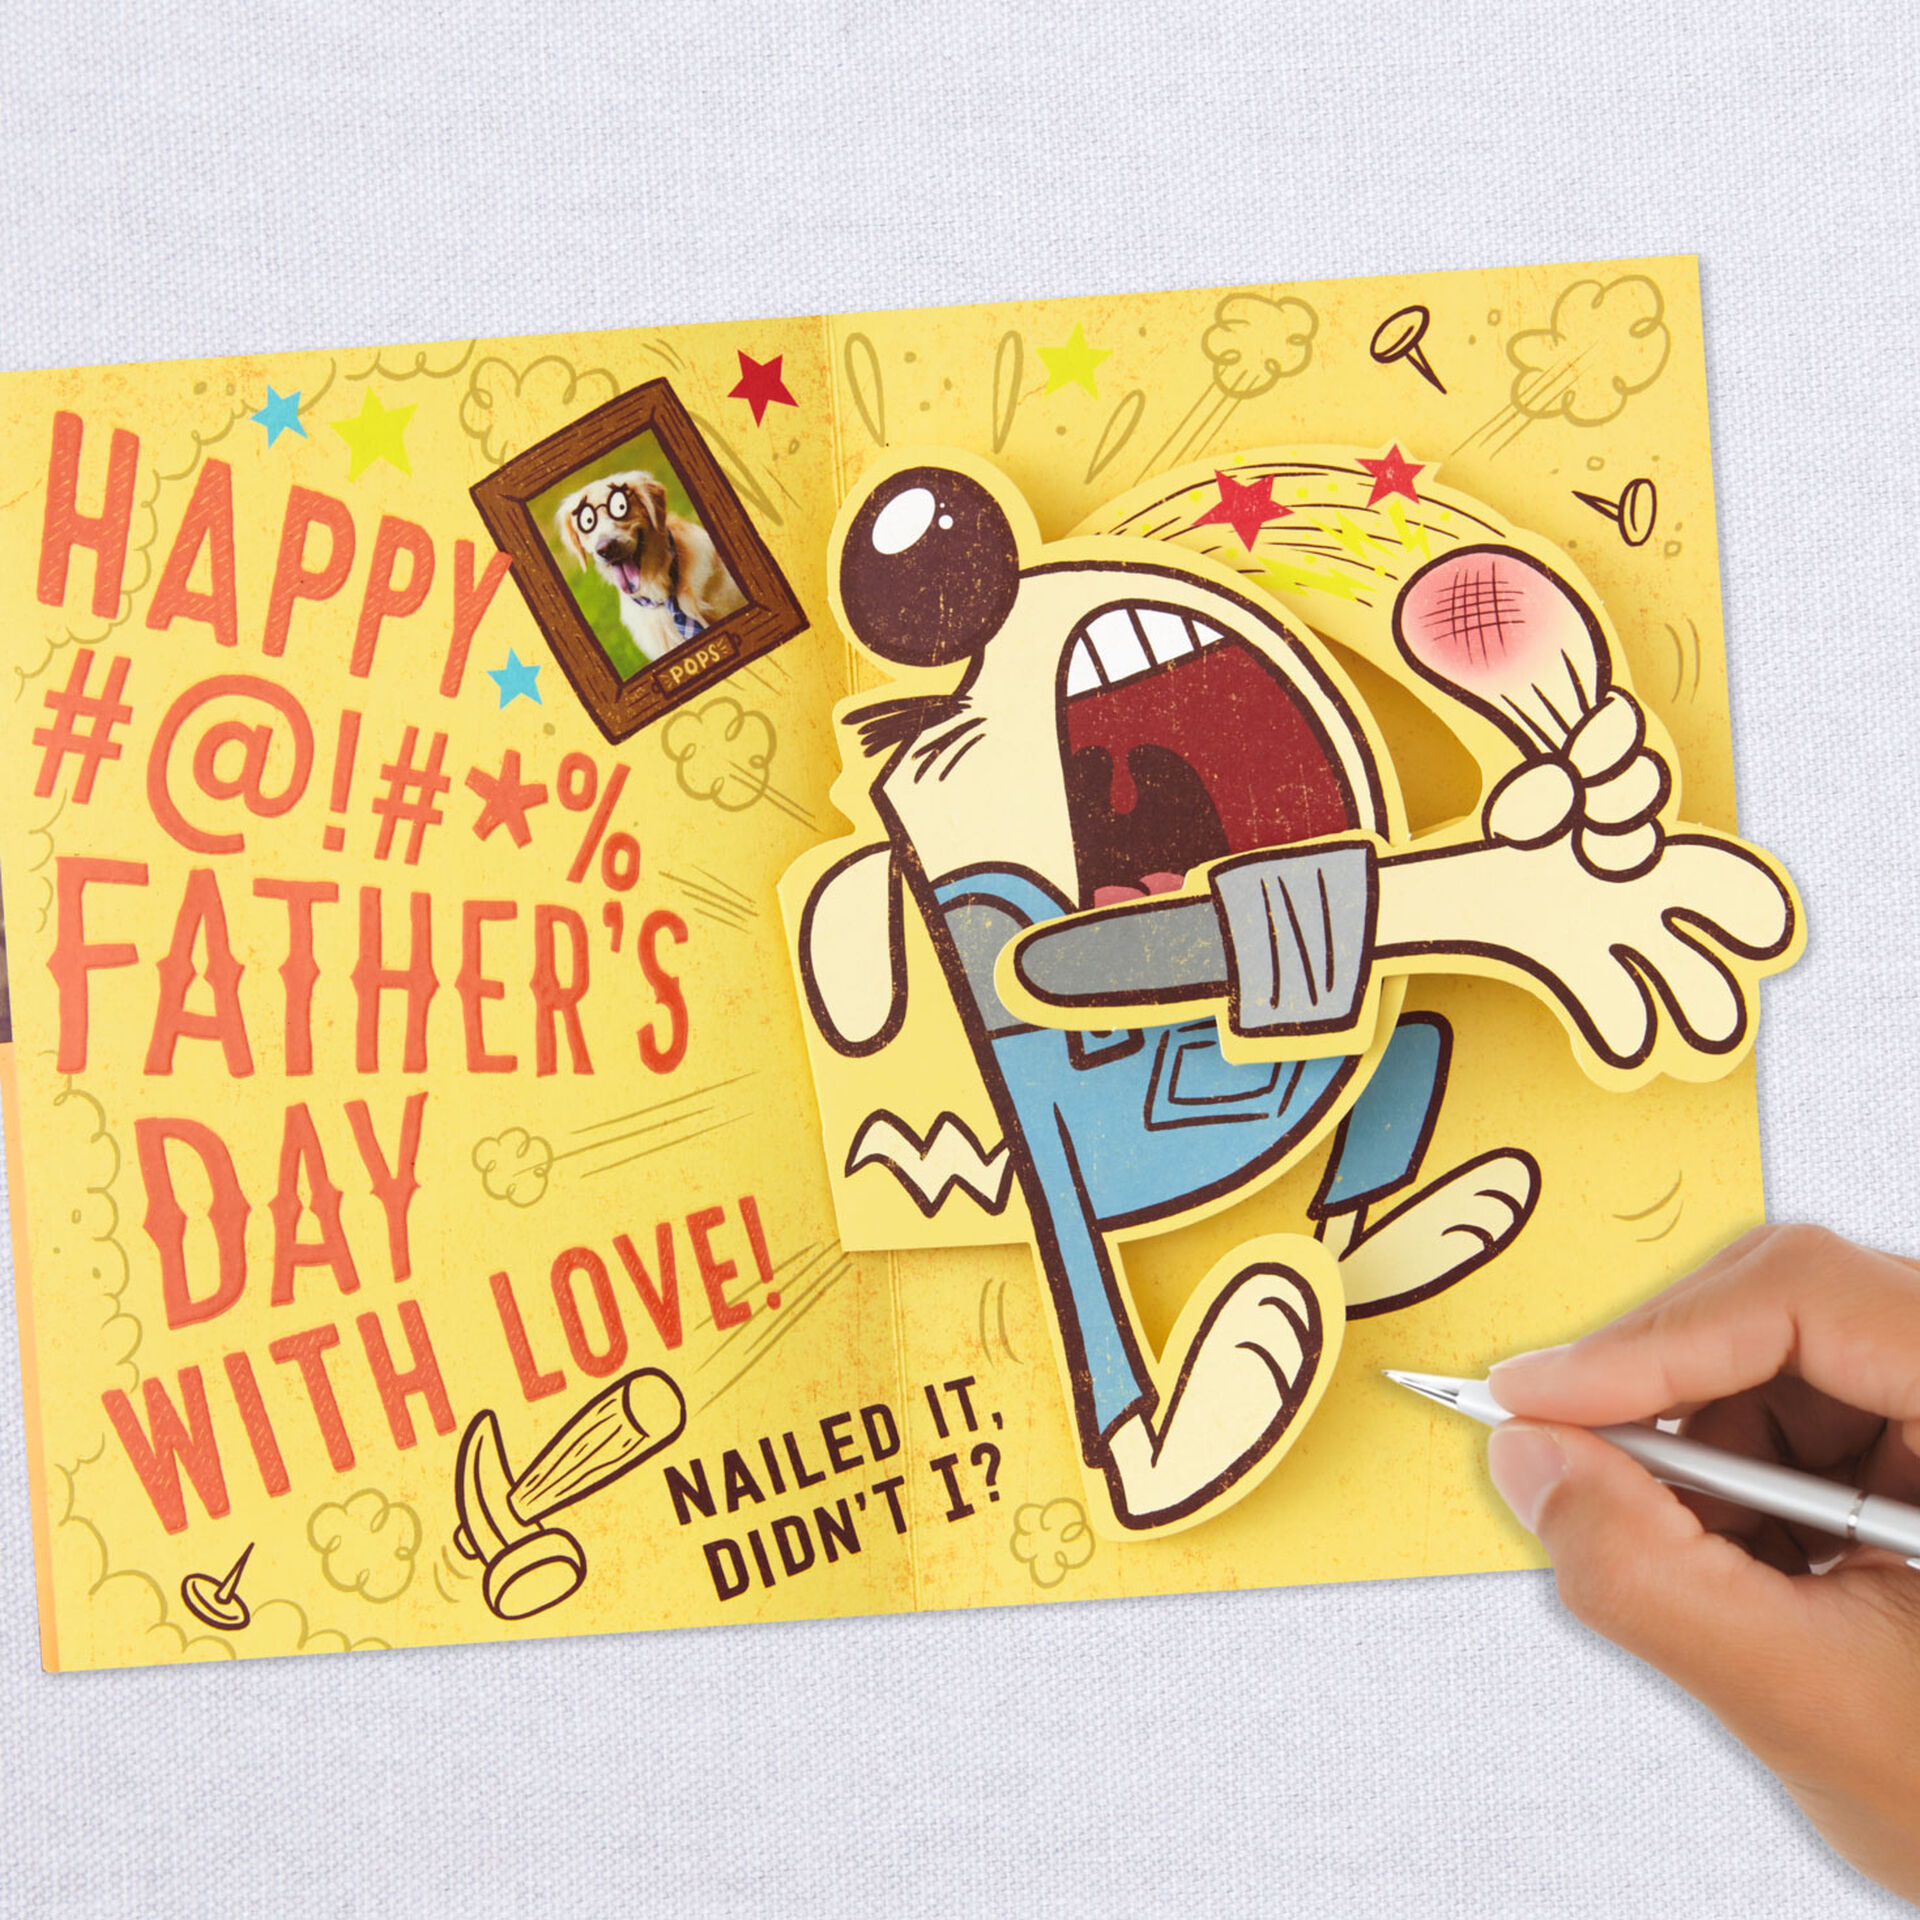 nailed-it-funny-pop-up-father-s-day-card-greeting-cards-hallmark